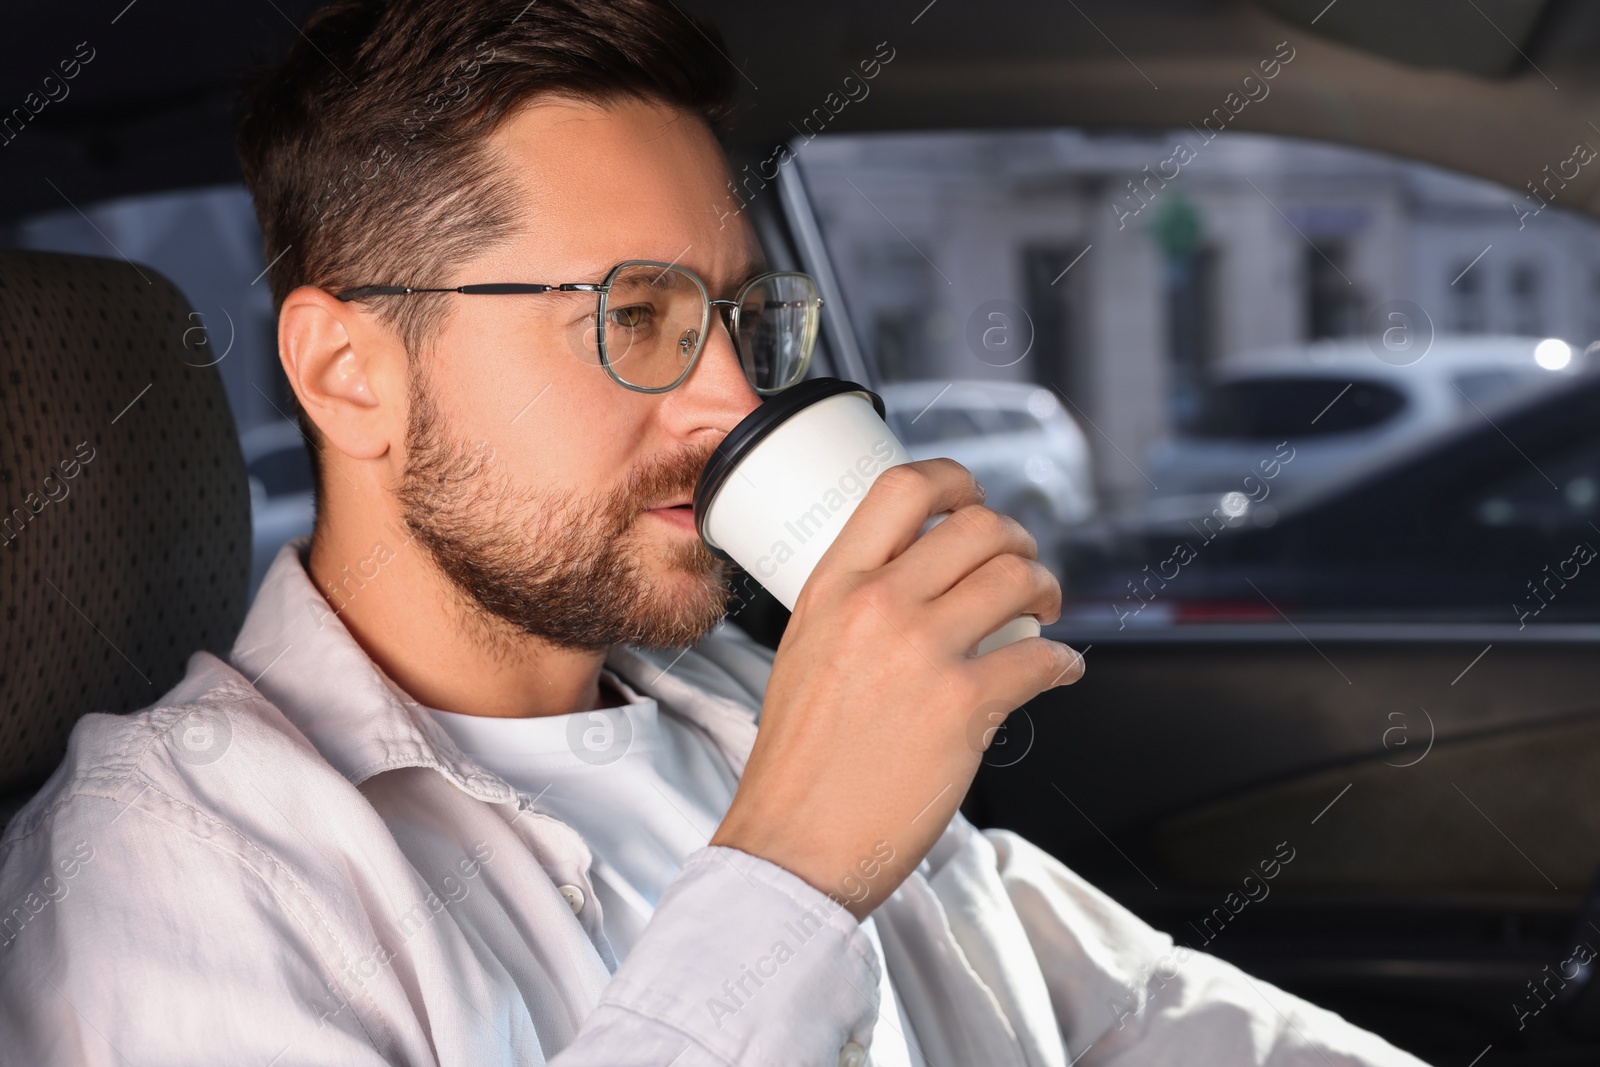 Photo of To-go drink. Handsome man drinking coffee in car